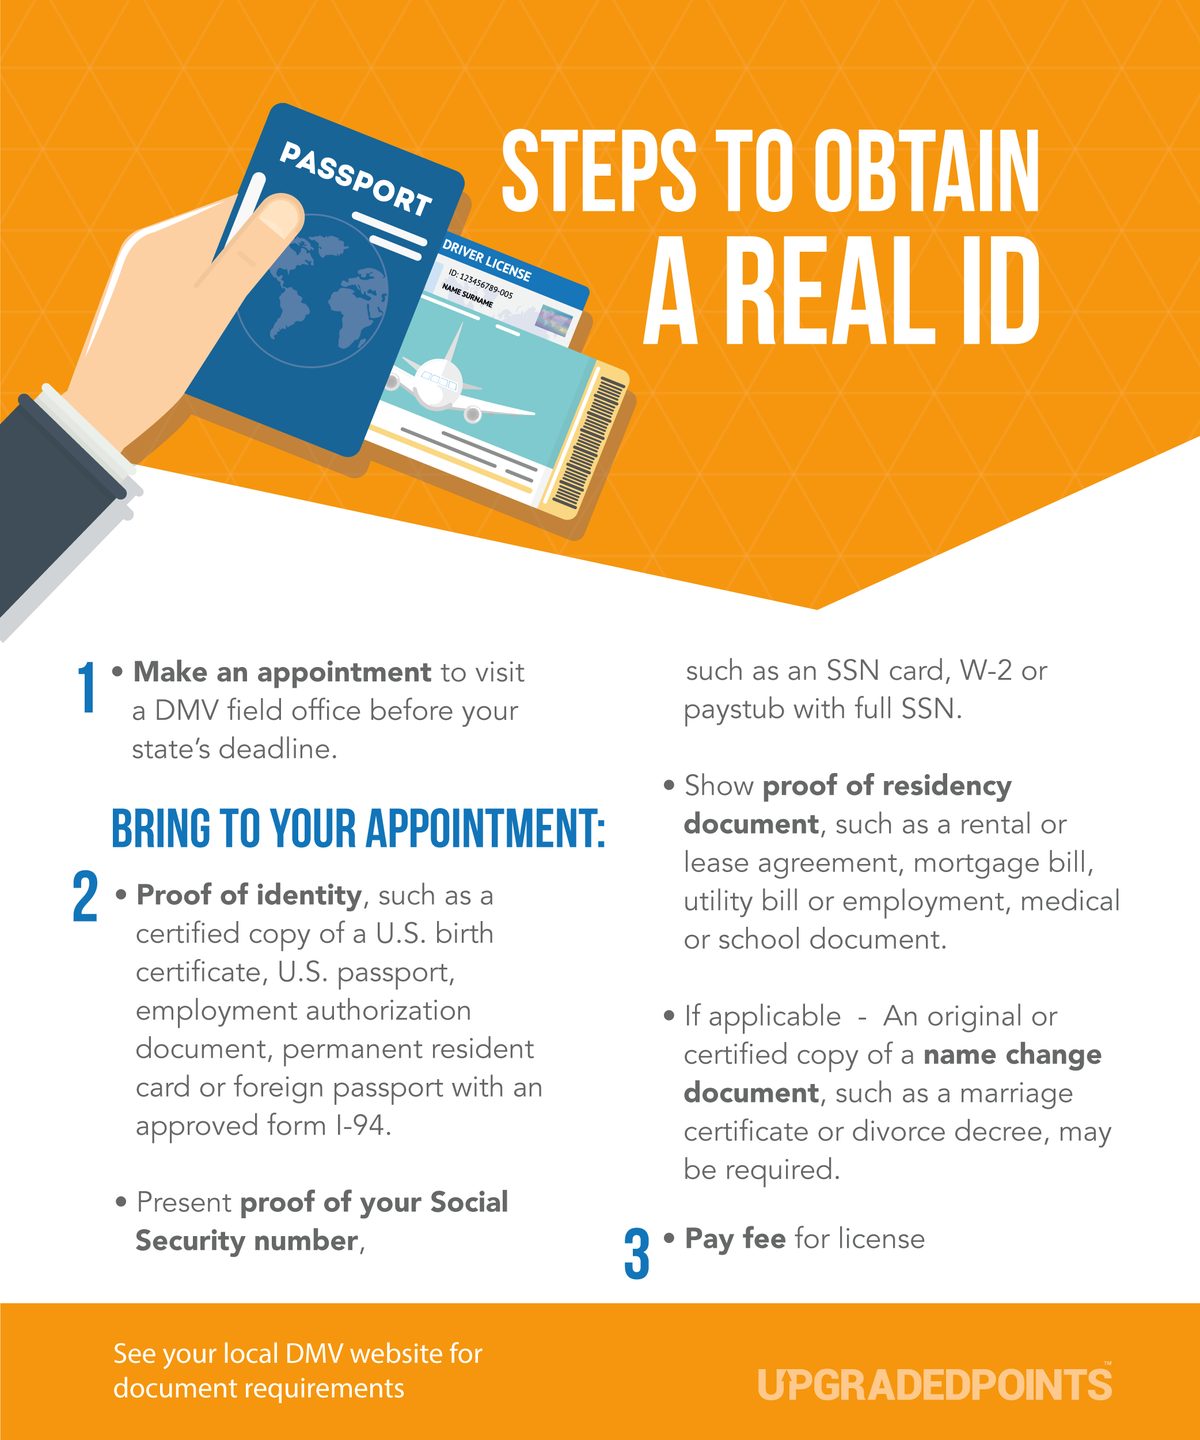 Steps To Get a REAL ID - Upgraded Points